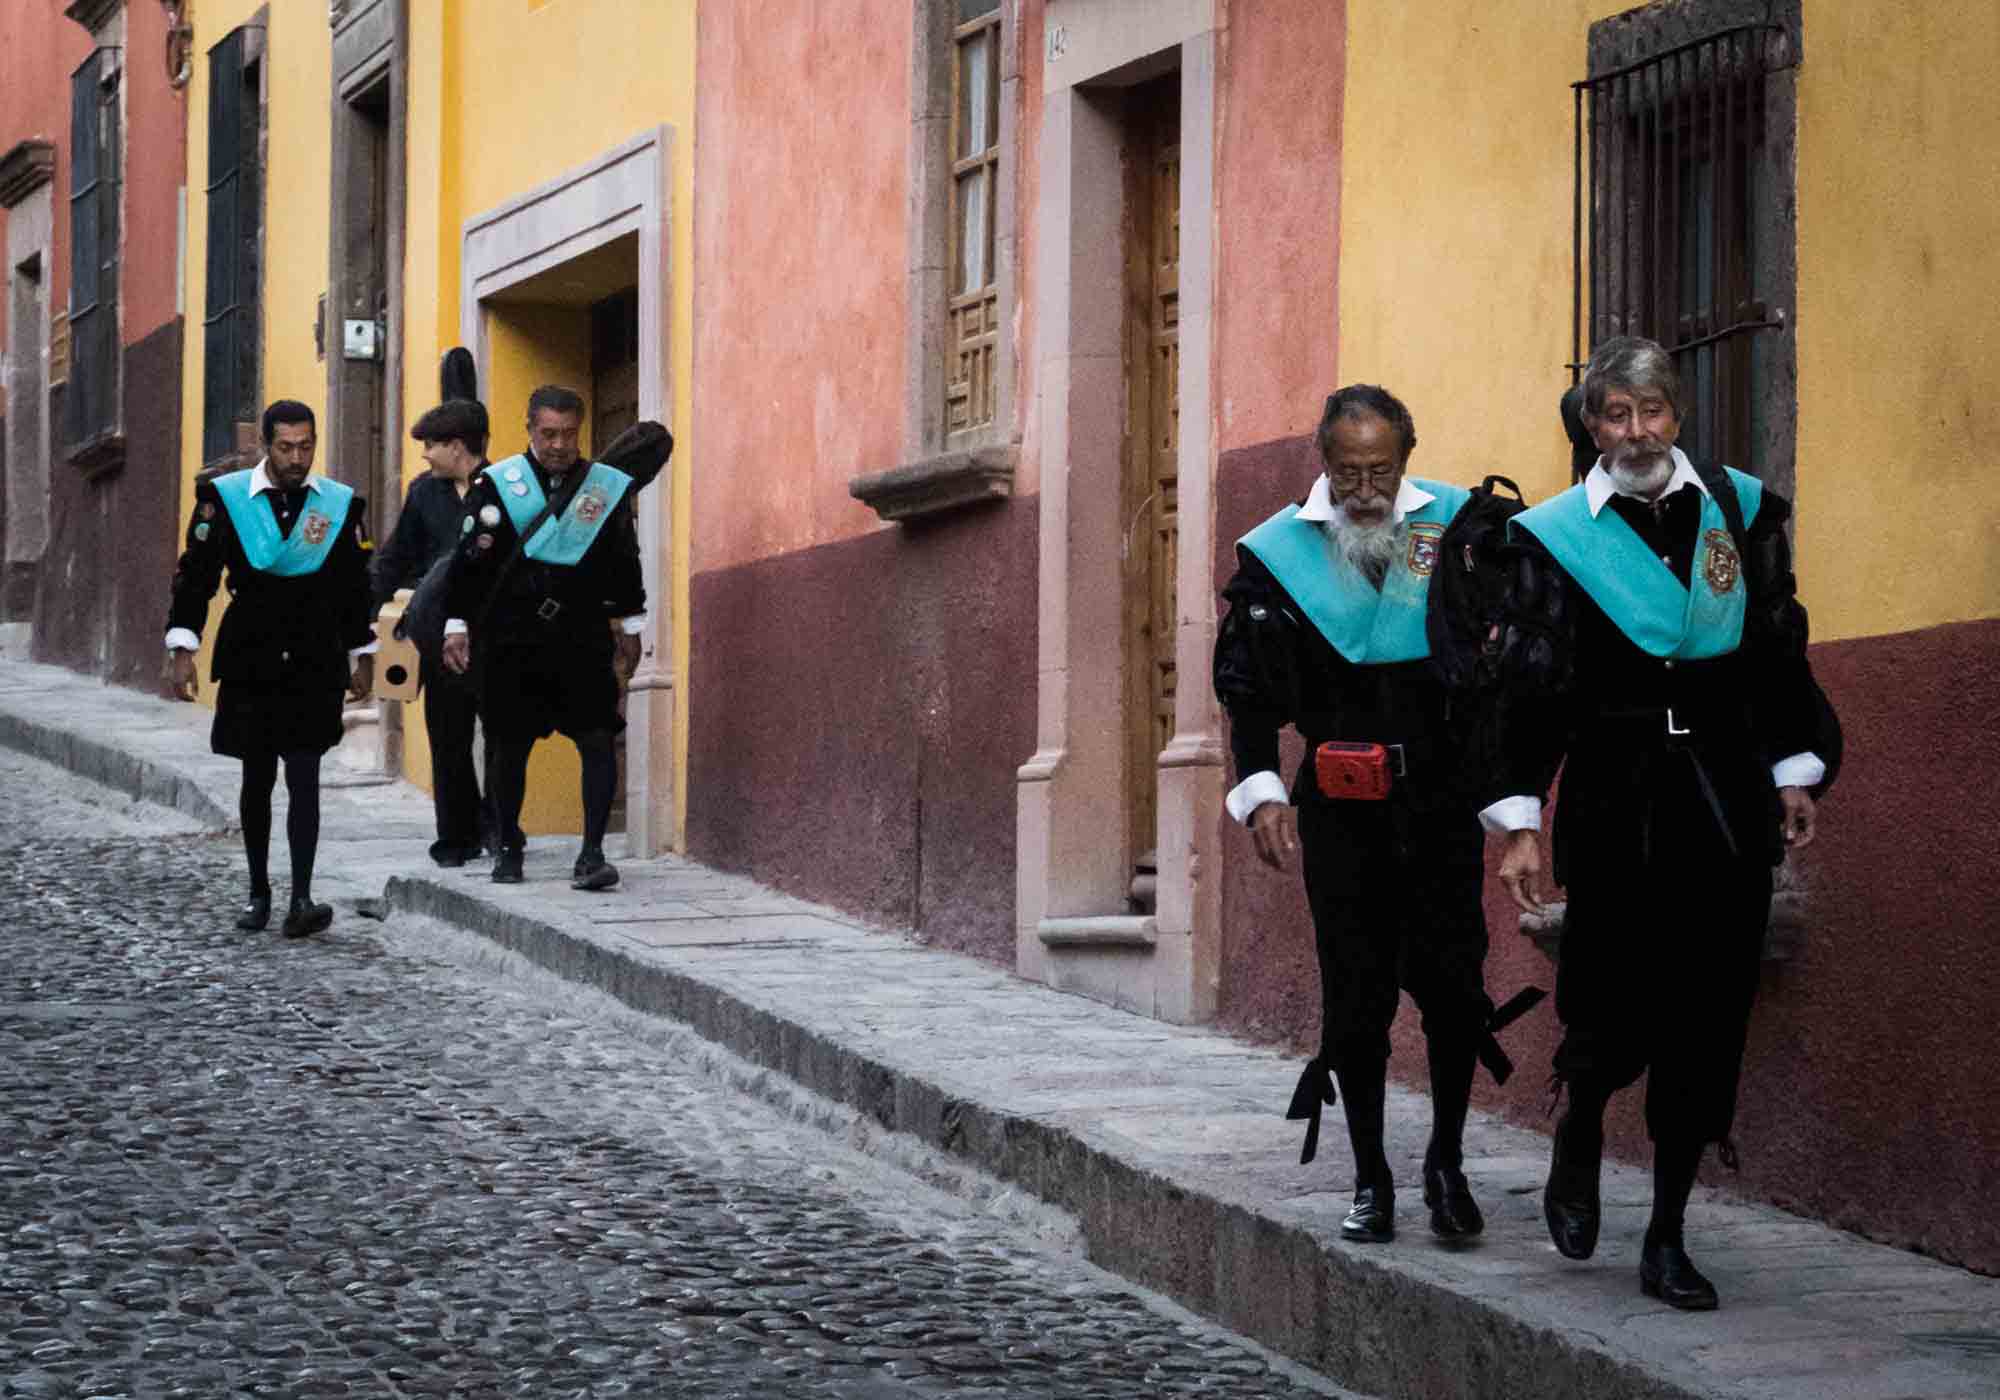 Men dressed in black and aqua traditional costumes walking down the street in San Miguel de Allende